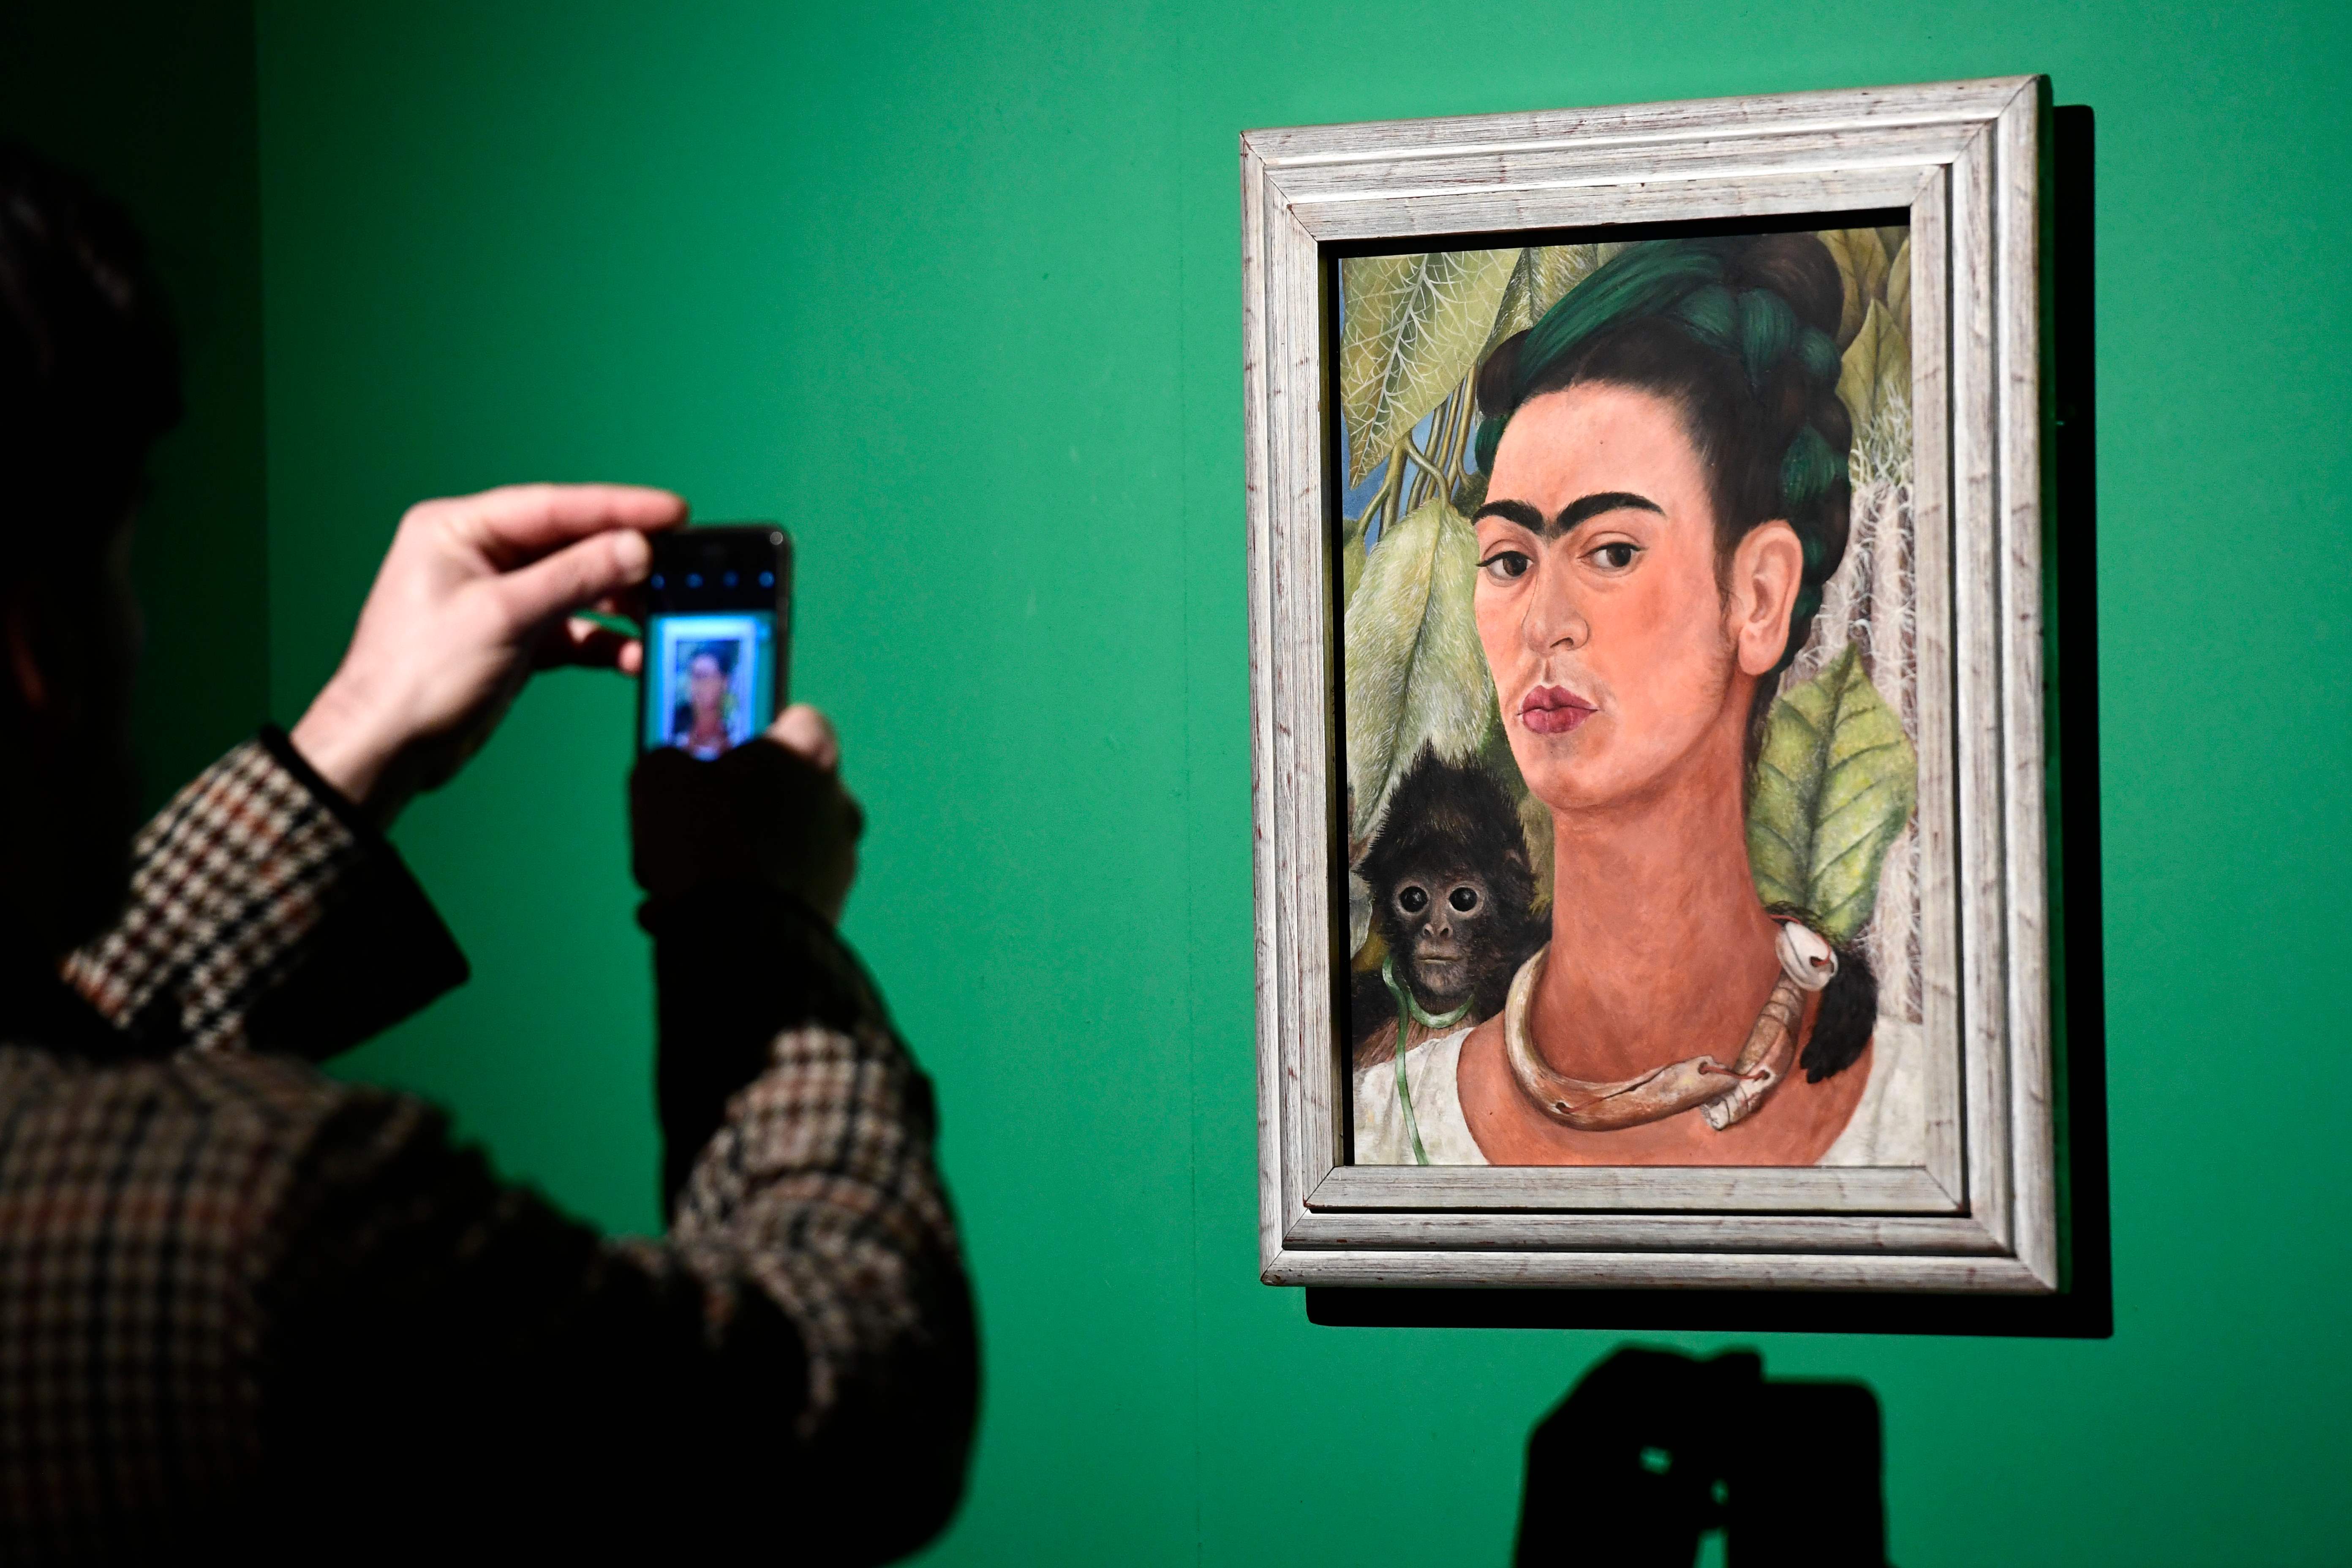 A journalists takes a picture of a painting by Mexican artist Frida Kahlo (1907-1954) called "Self-portrait with Monkey" during a press visit to her exhibition "Oltre il mito" (Beyond the Myth) at the Mudec (Museo delle Culture - Museum of Culture) in Milan on January 31, 2018. The exhibition runs from February 1 to June 3, 2018. / AFP PHOTO / MIGUEL MEDINA / RESTRICTED TO EDITORIAL USE - MANDATORY MENTION OF THE ARTIST UPON PUBLICATION - TO ILLUSTRATE THE EVENT AS SPECIFIED IN THE CAPTION